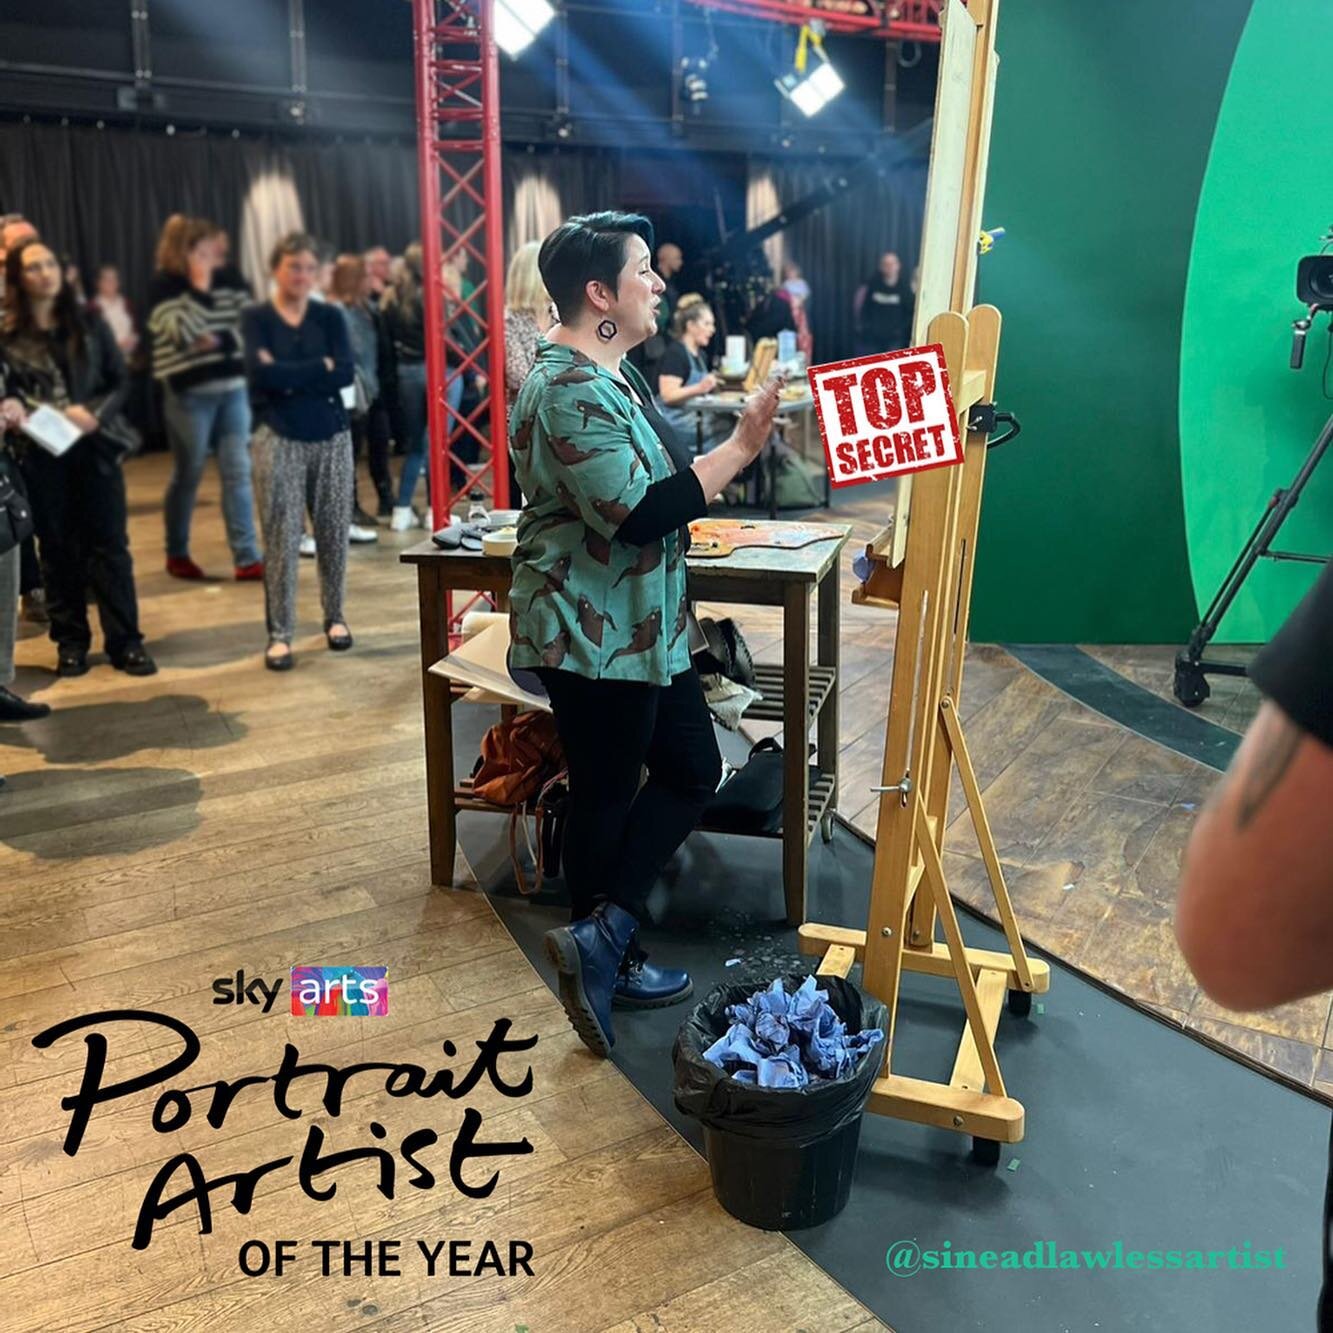 I have managed to go and get picked as a contestant for this year's Sky Arts Portrait Artist of the Year!! We filmed recently and it feels like a dream. I can't share any of the details with you but stay posted! I believe the show will air sometime i